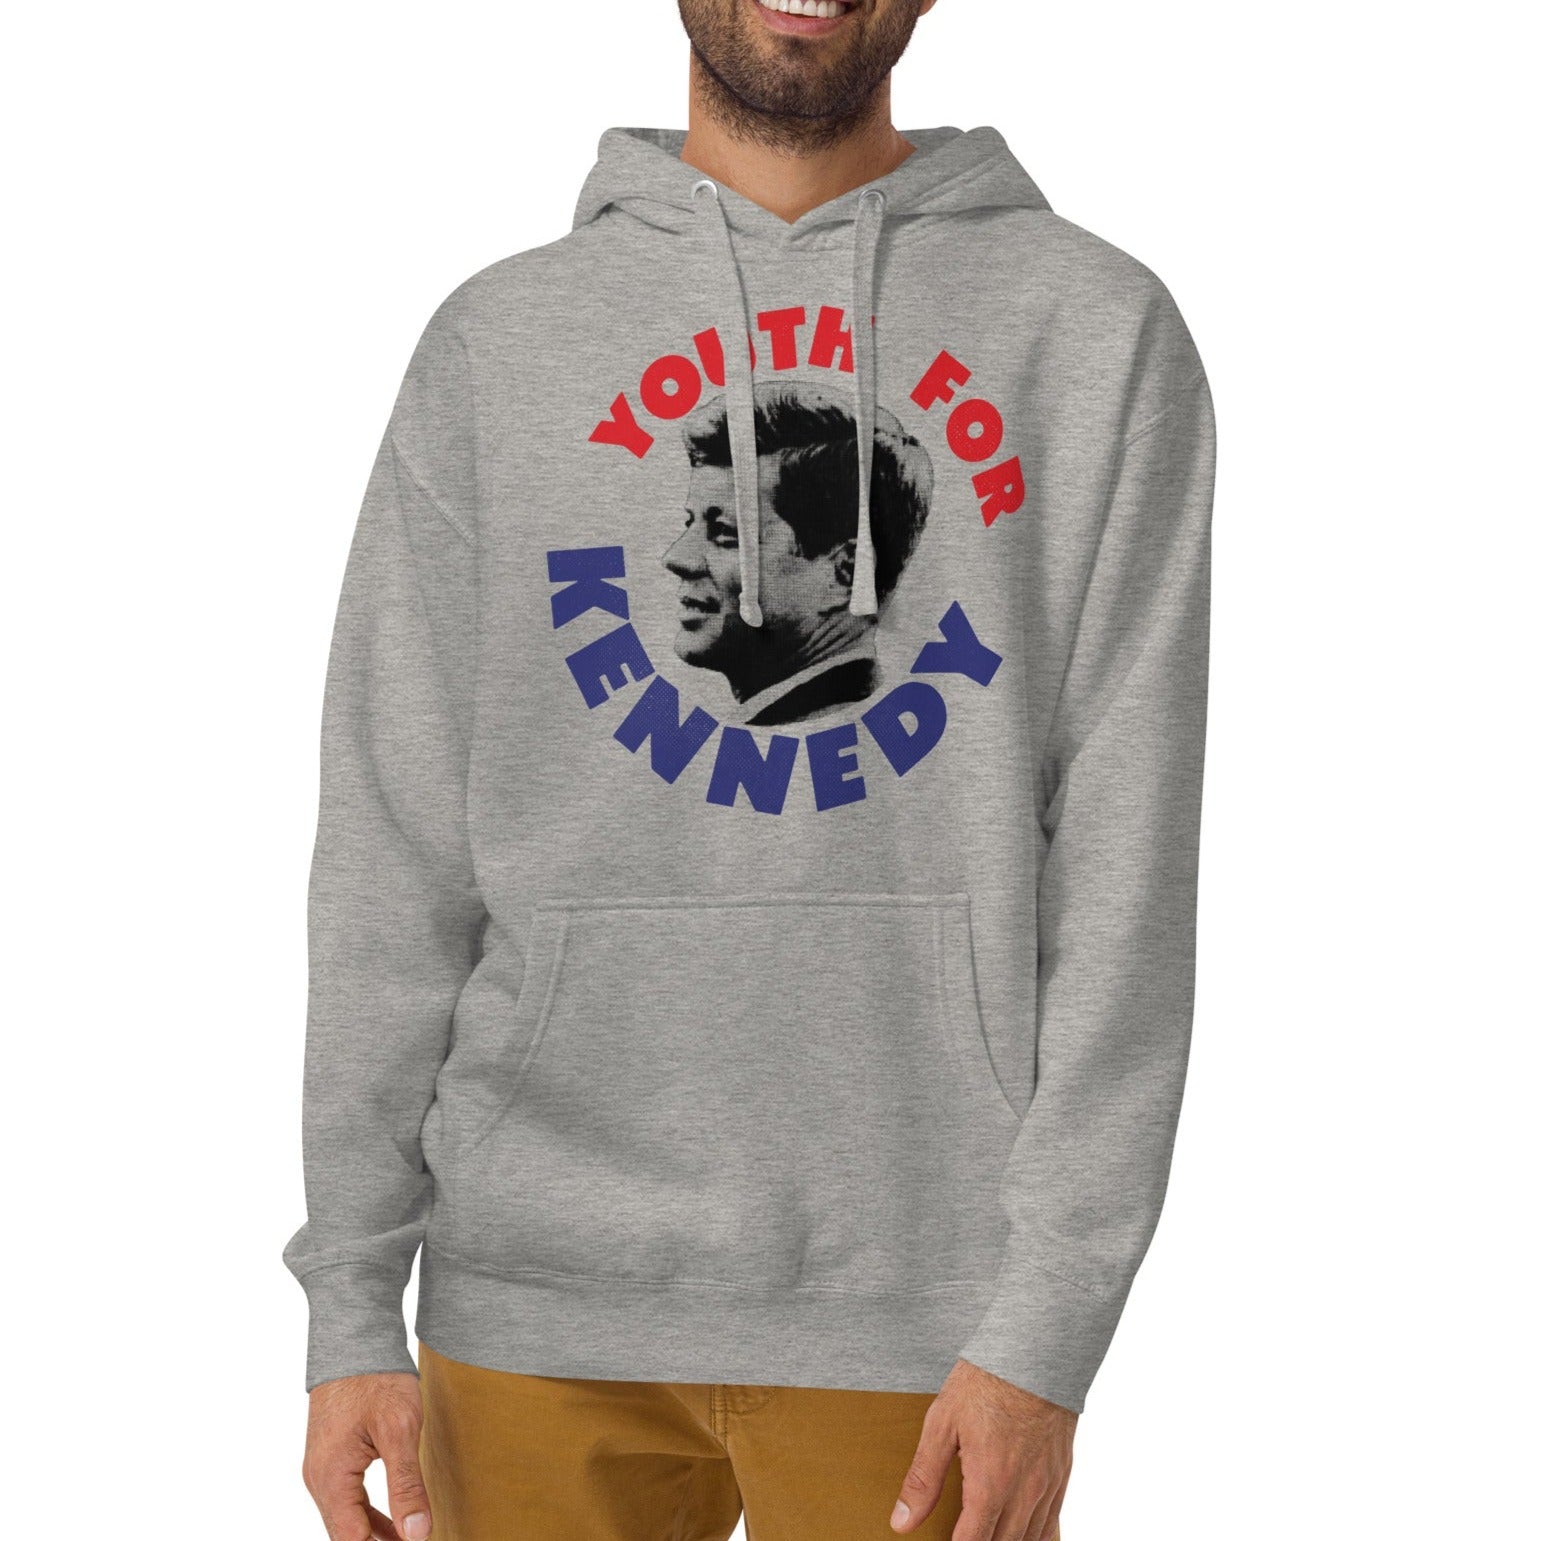 Youth For Kennedy Retro Campaign Unisex Hoodie